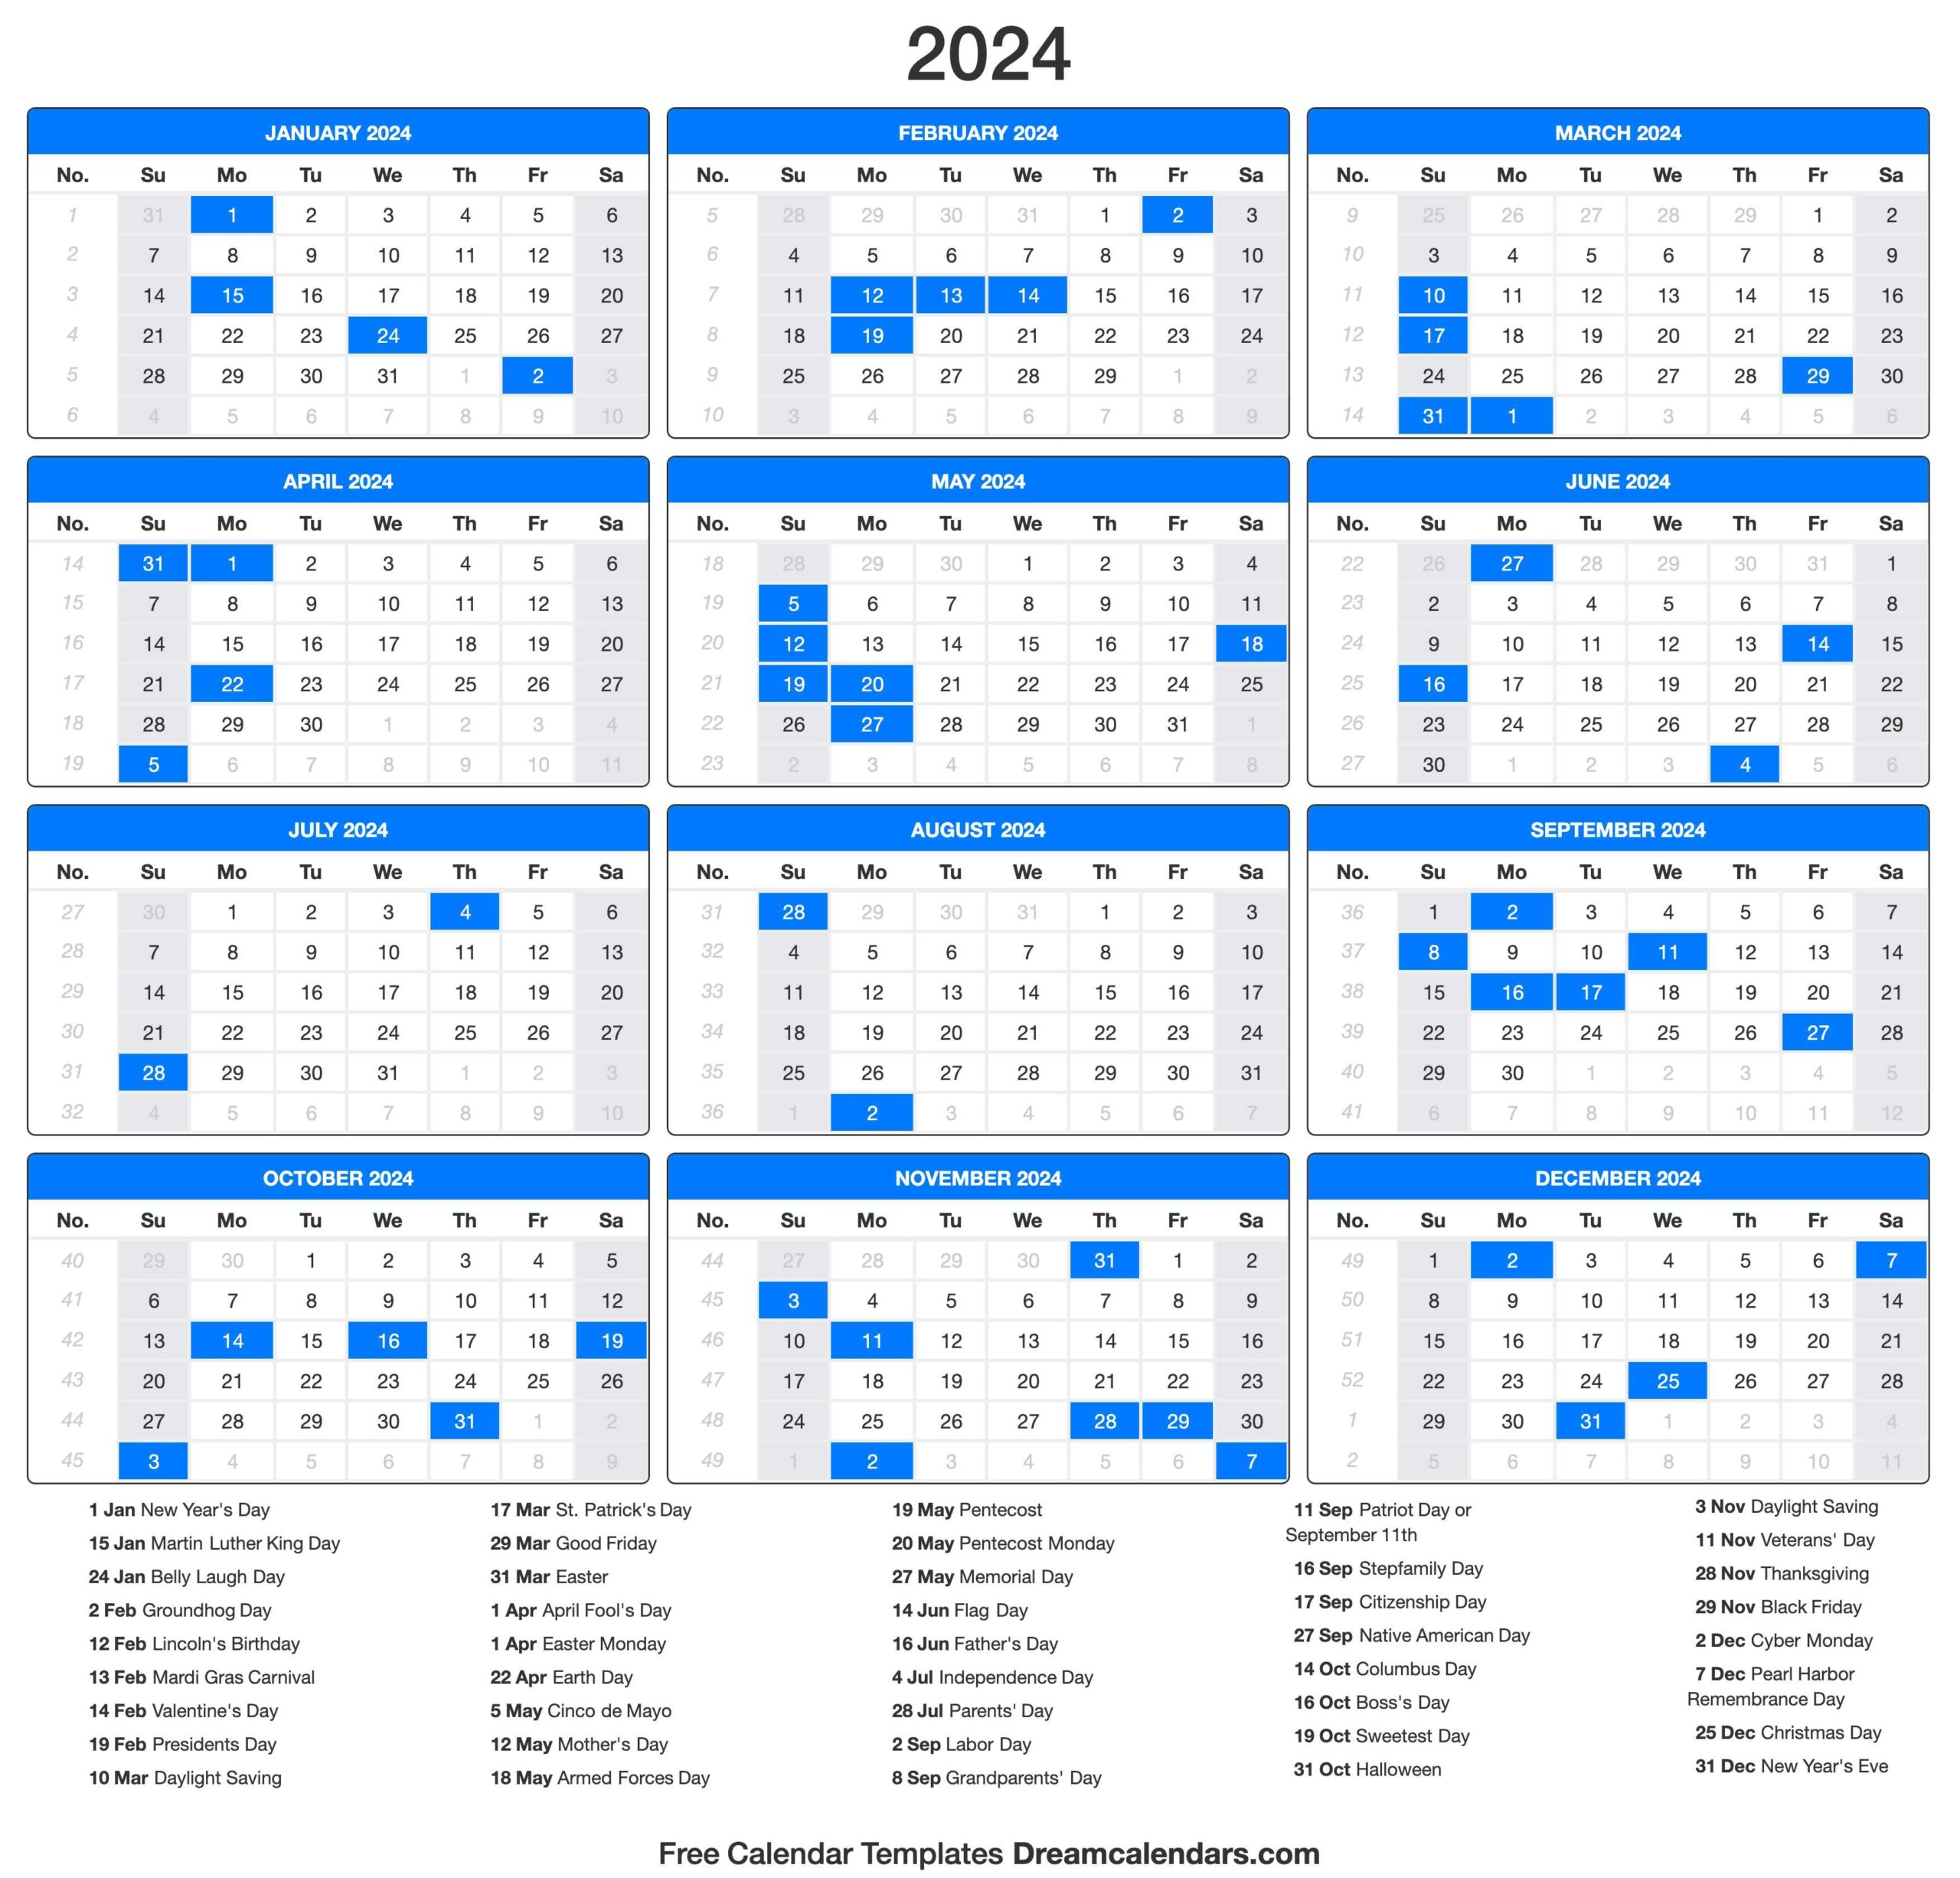 2024 Calendar - Free Printable 2024 Monthly Calendar With Holidays And Moon Phases